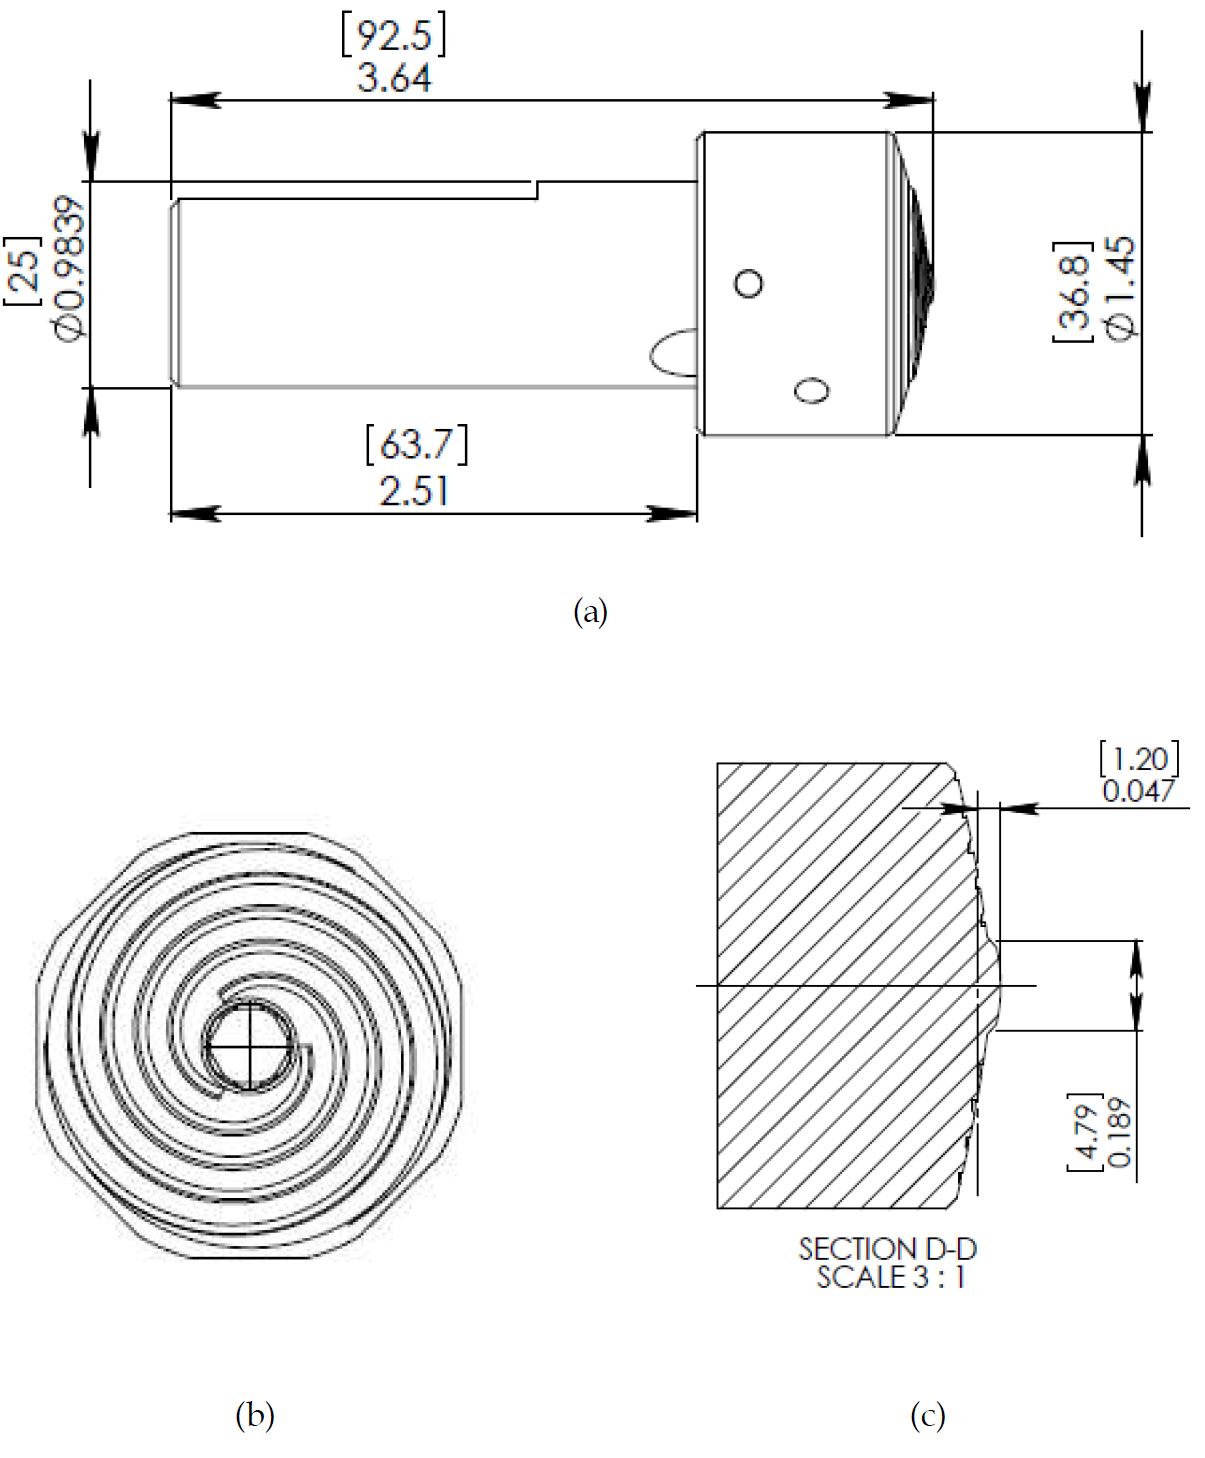 Dessin of the tool for welding of high melting point materials (a) side view (b) front view (c) details for probe and shoulder